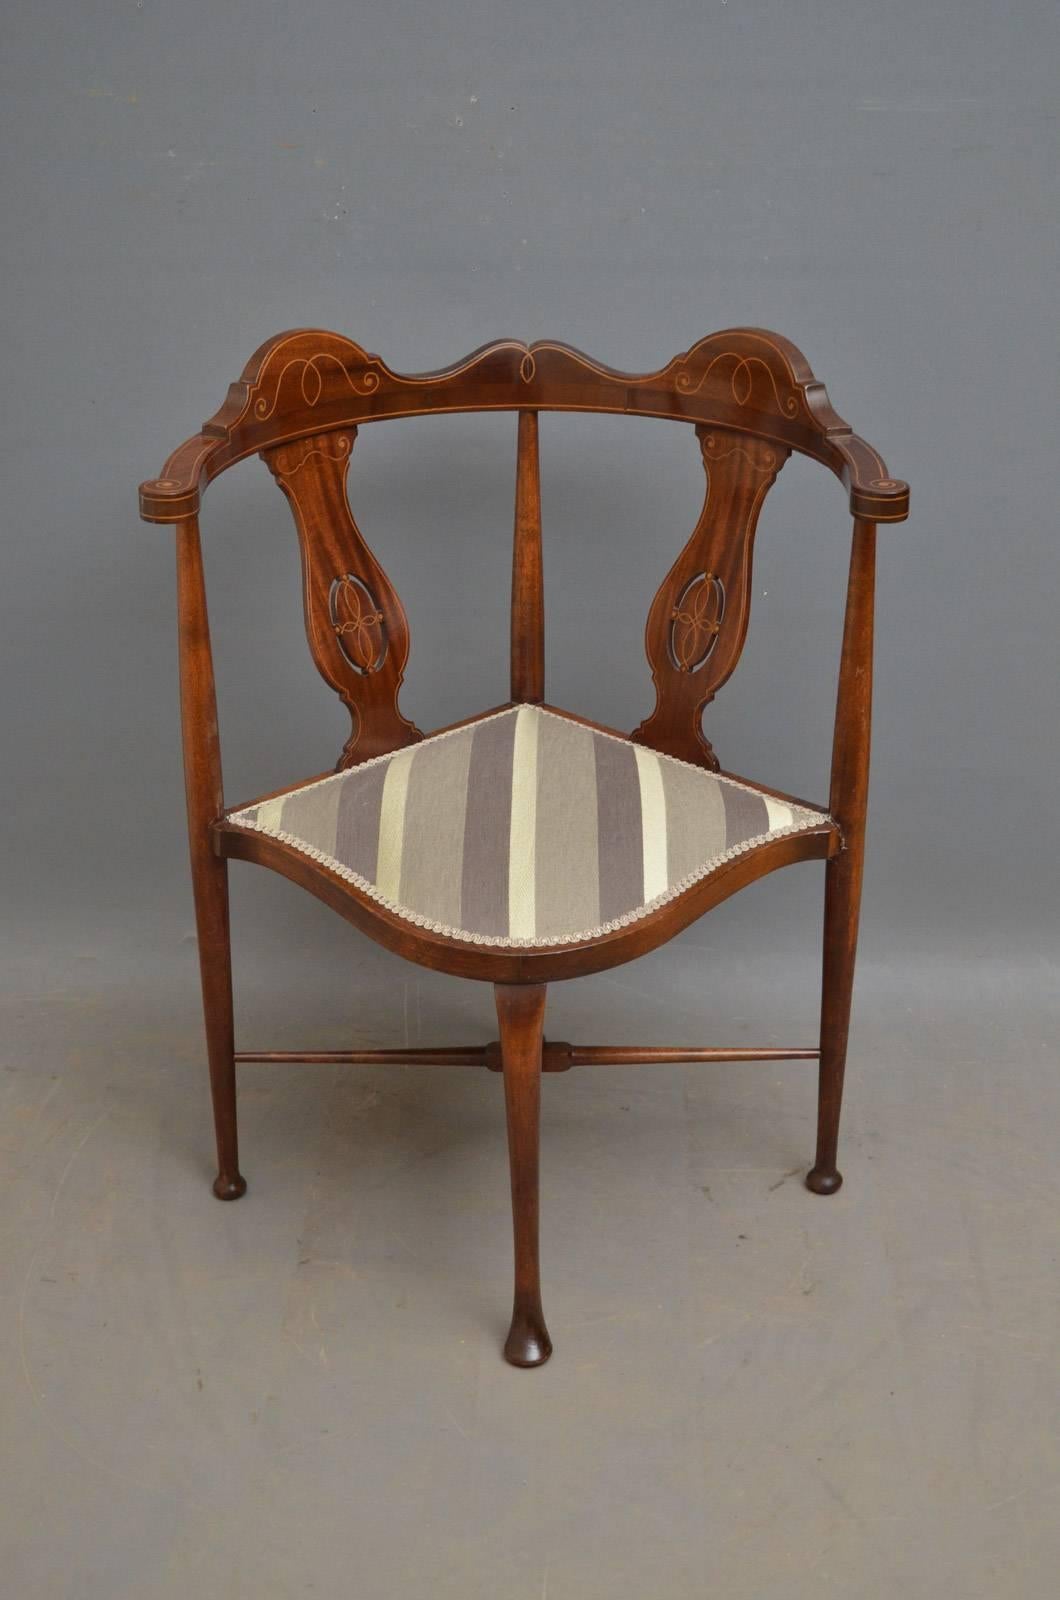 J00 Edwardian corner chair with shaped and inlaid top rail above decorative slat and generous seat, all standing on turned legs terminating in pad feet. This antique chair is in wonderful home ready condition, circa 1900
Measures: H 16